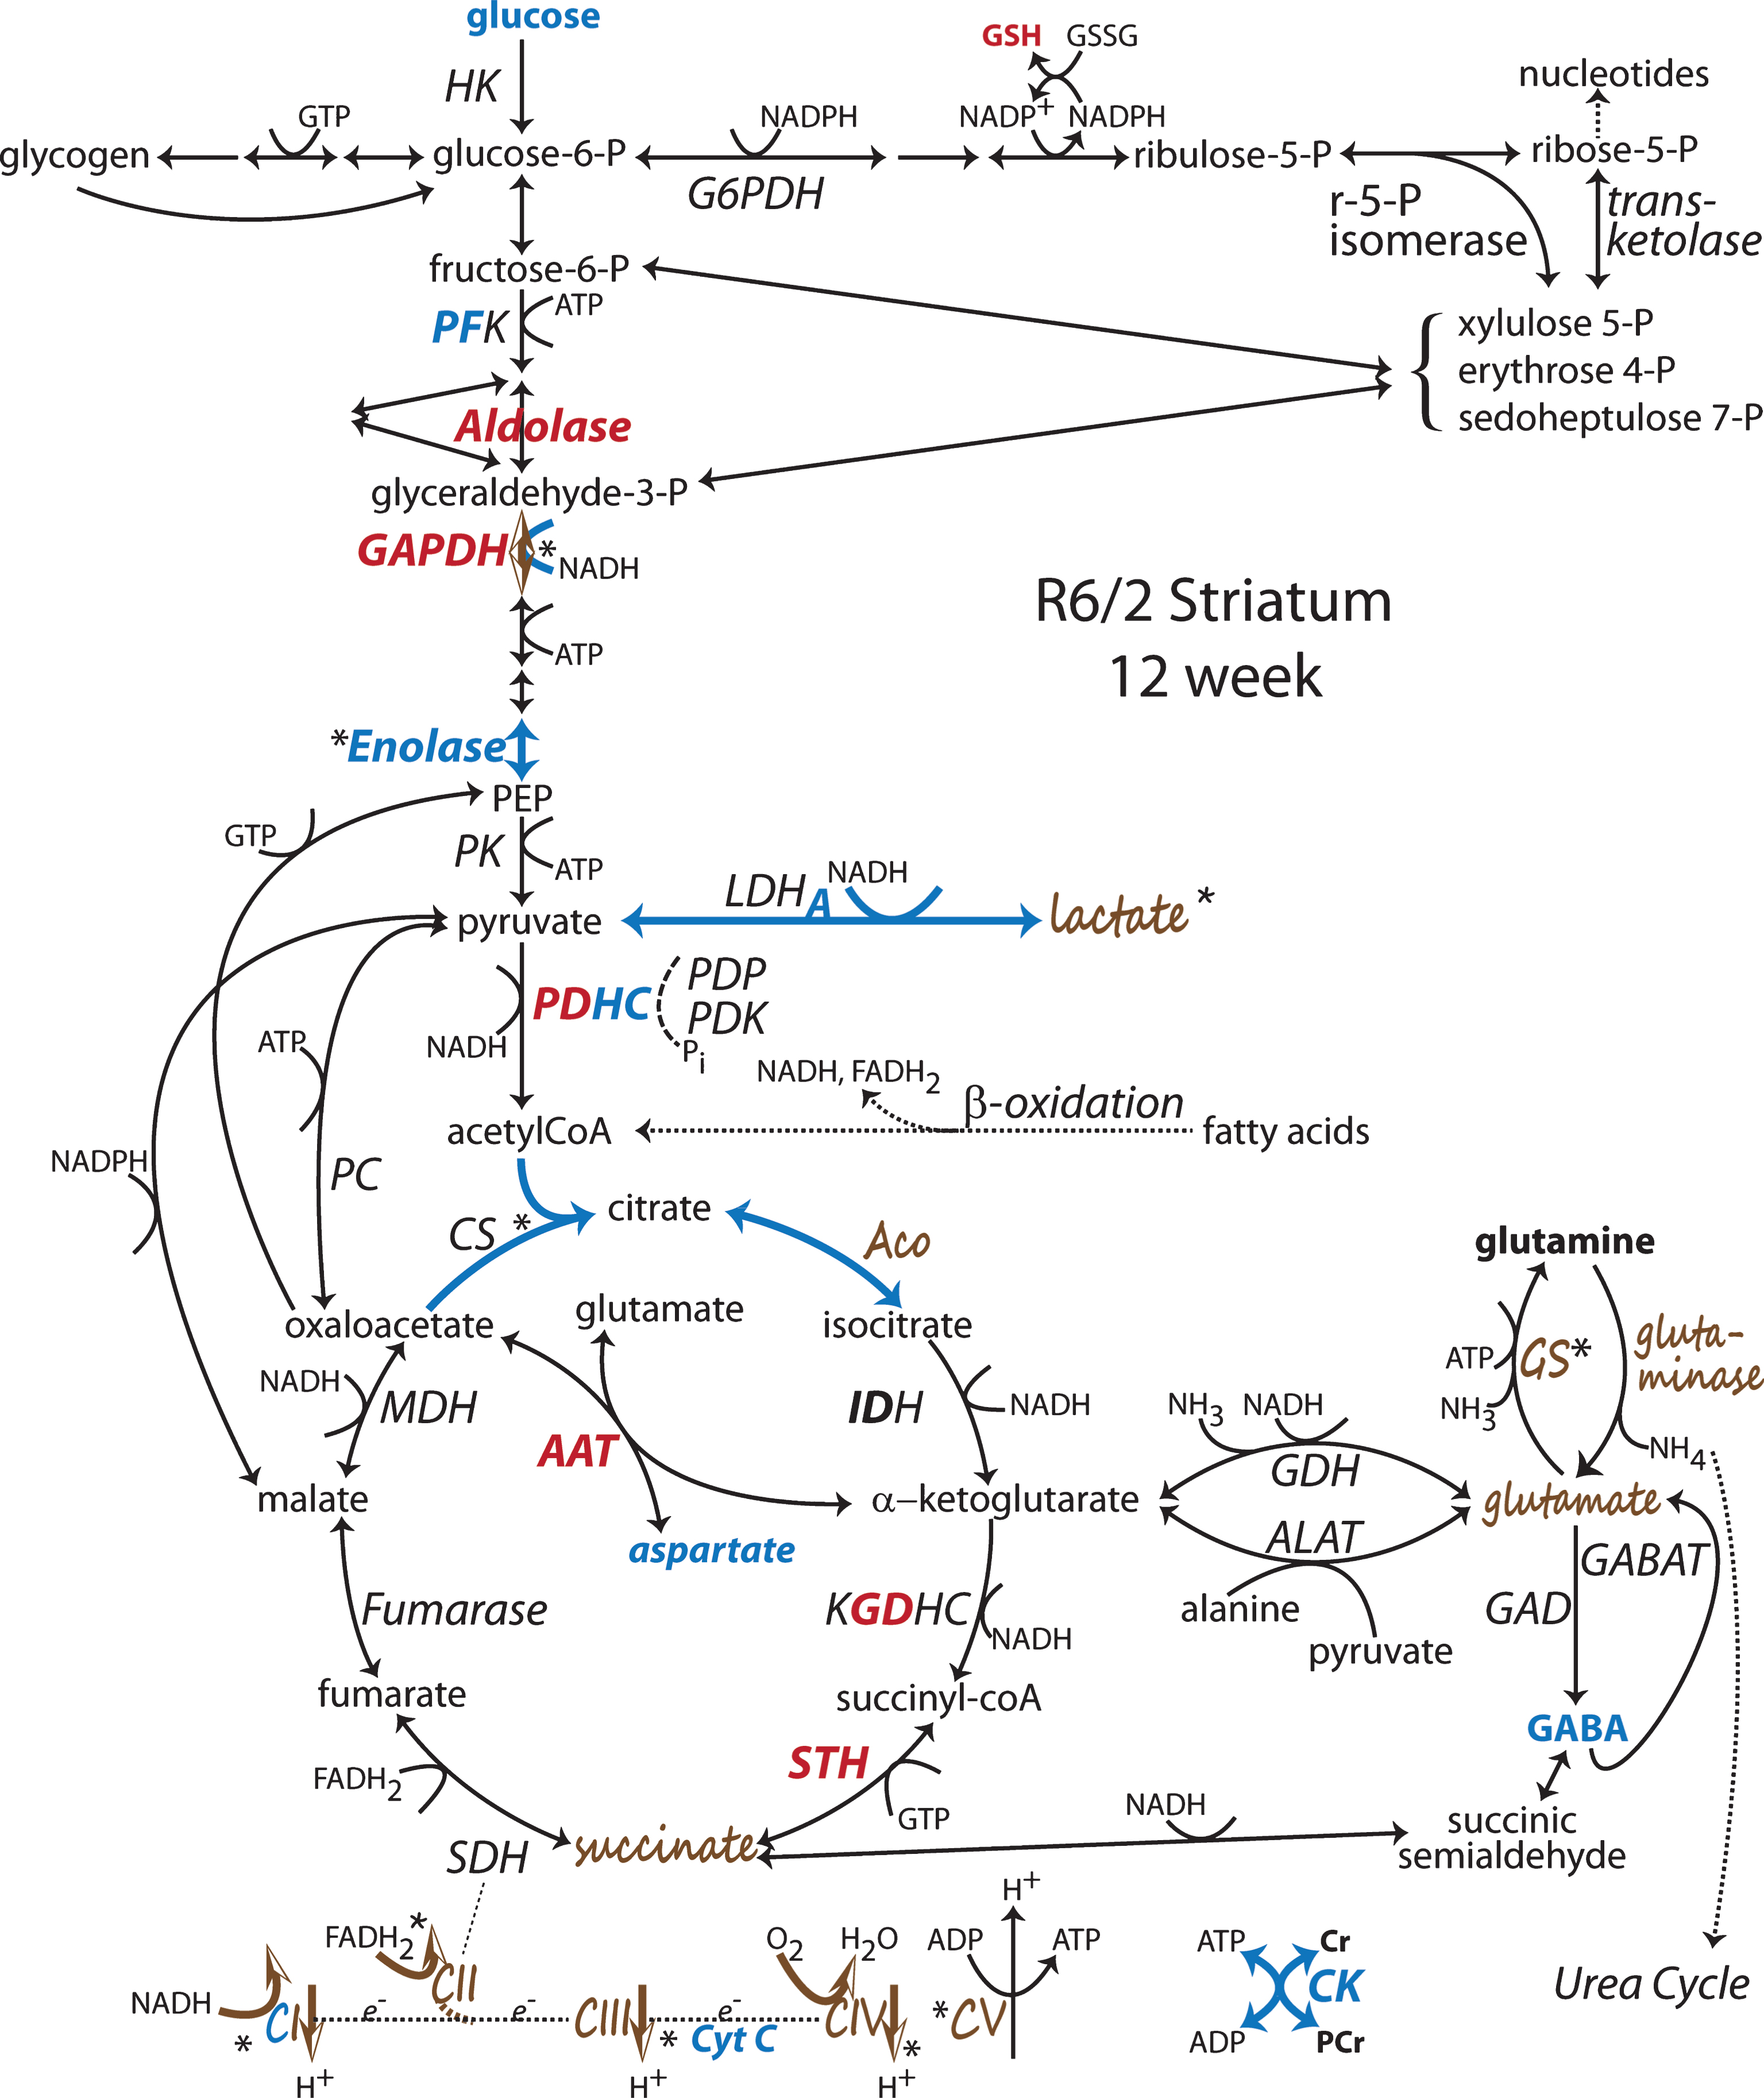 Changes to metabolic pathways determined from R6/2 striatum late in disease at 12 wk of age. Annotations as in Fig. 1 [53, 54, 56, 67, 68, 70, 73, 92, 104, 105, 110, 111, 113, 134, 136–138, 182, 204, 252, 253]. Note: Bold indicates an enzyme expression or activity has been assayed. Bold black or red indicates upregulation. Bold grey or blue indicates downregulation. Bolding of an enzyme or metabolite name indicate protein expression or concentration alterations. Partial bolding or coloring indicates differential expression changes among subunits. Bolding and/or coloring of arrows indicate activity changes. No change is indicated by a brown script font or a half open brown arrowhead. The default sans serif black font and thin black arrows with small heads indicate that no specific information is available. Combinations of symbol changes and asterisks (*) indicate conflicting reports from different laboratories.